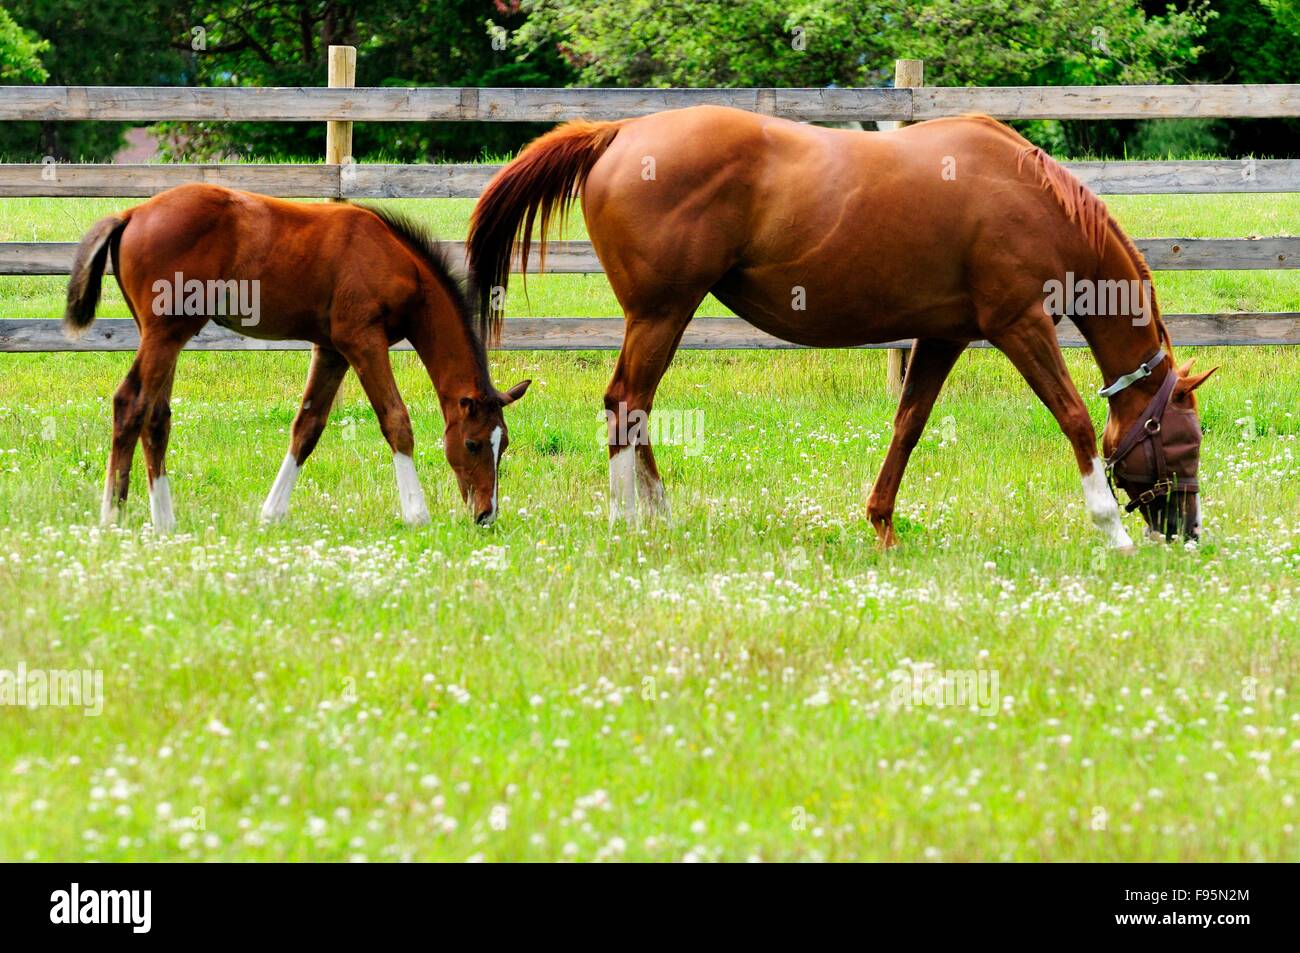 A colt and mare eating grass in a field. Stock Photo